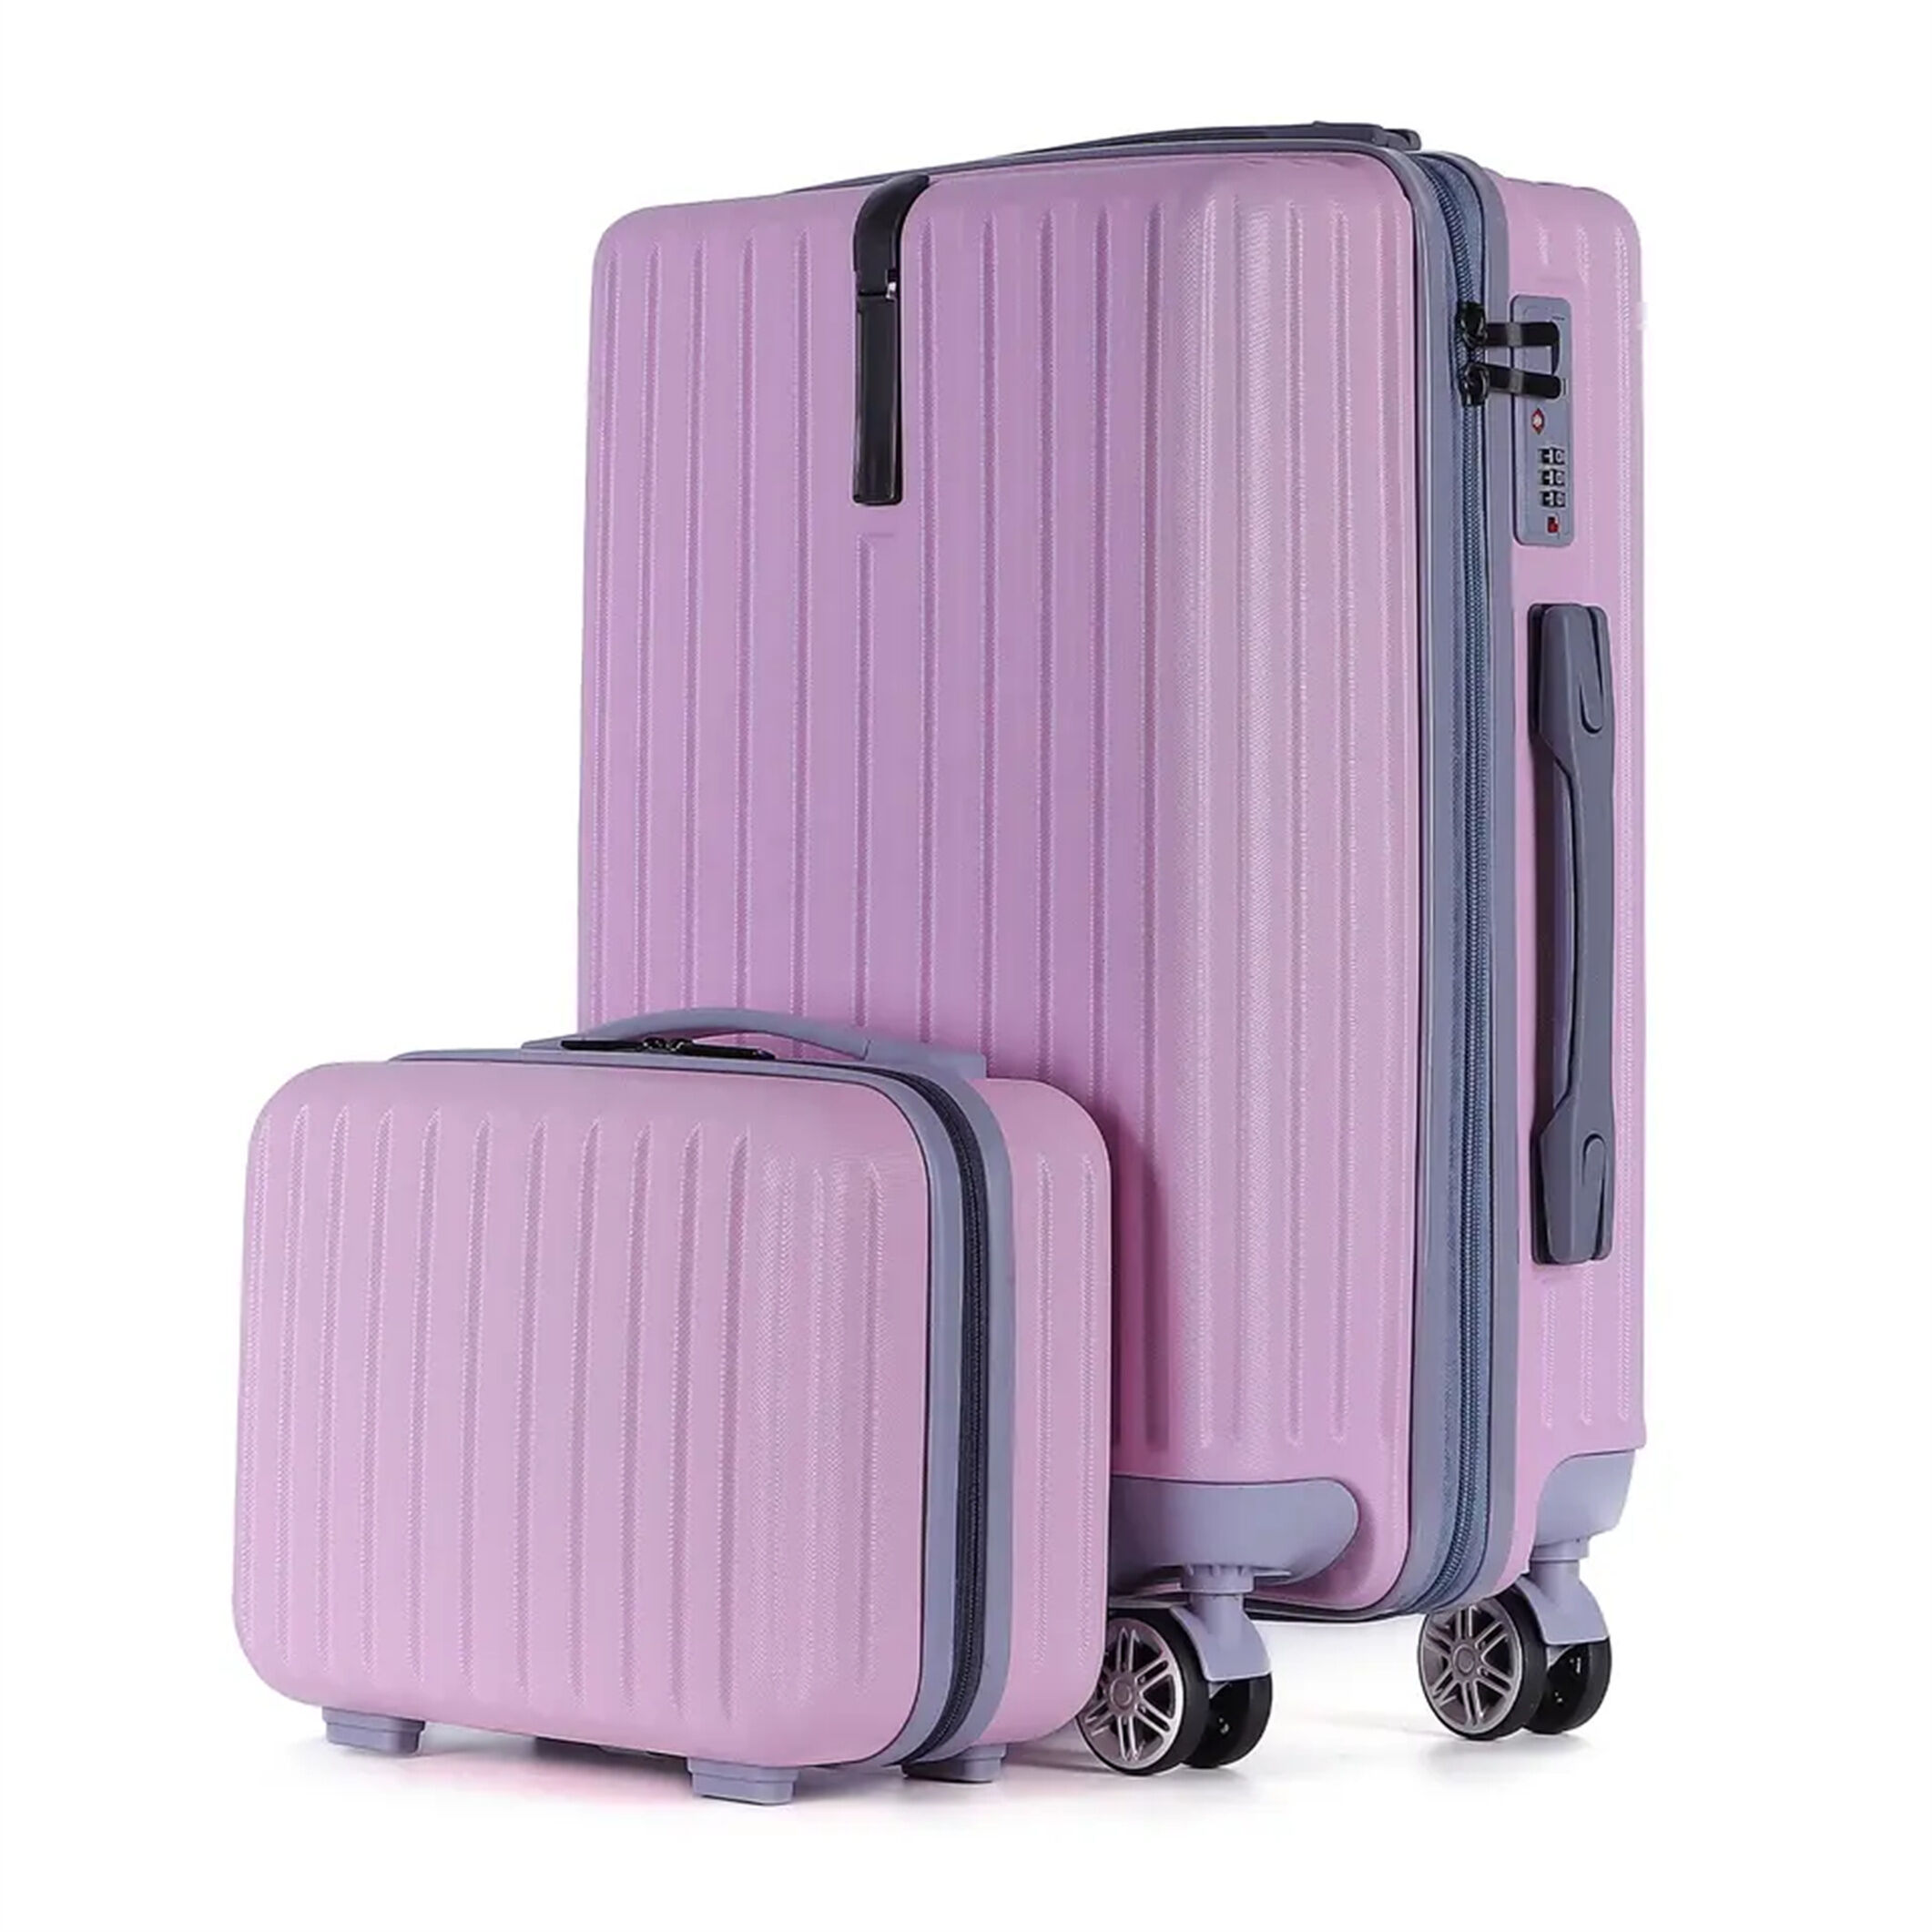 Wholesale Factory Price Customize Travel Trolley Case Luggage sets Bag ABS  Hardshell Lightweight Carry On Suitcase From m.